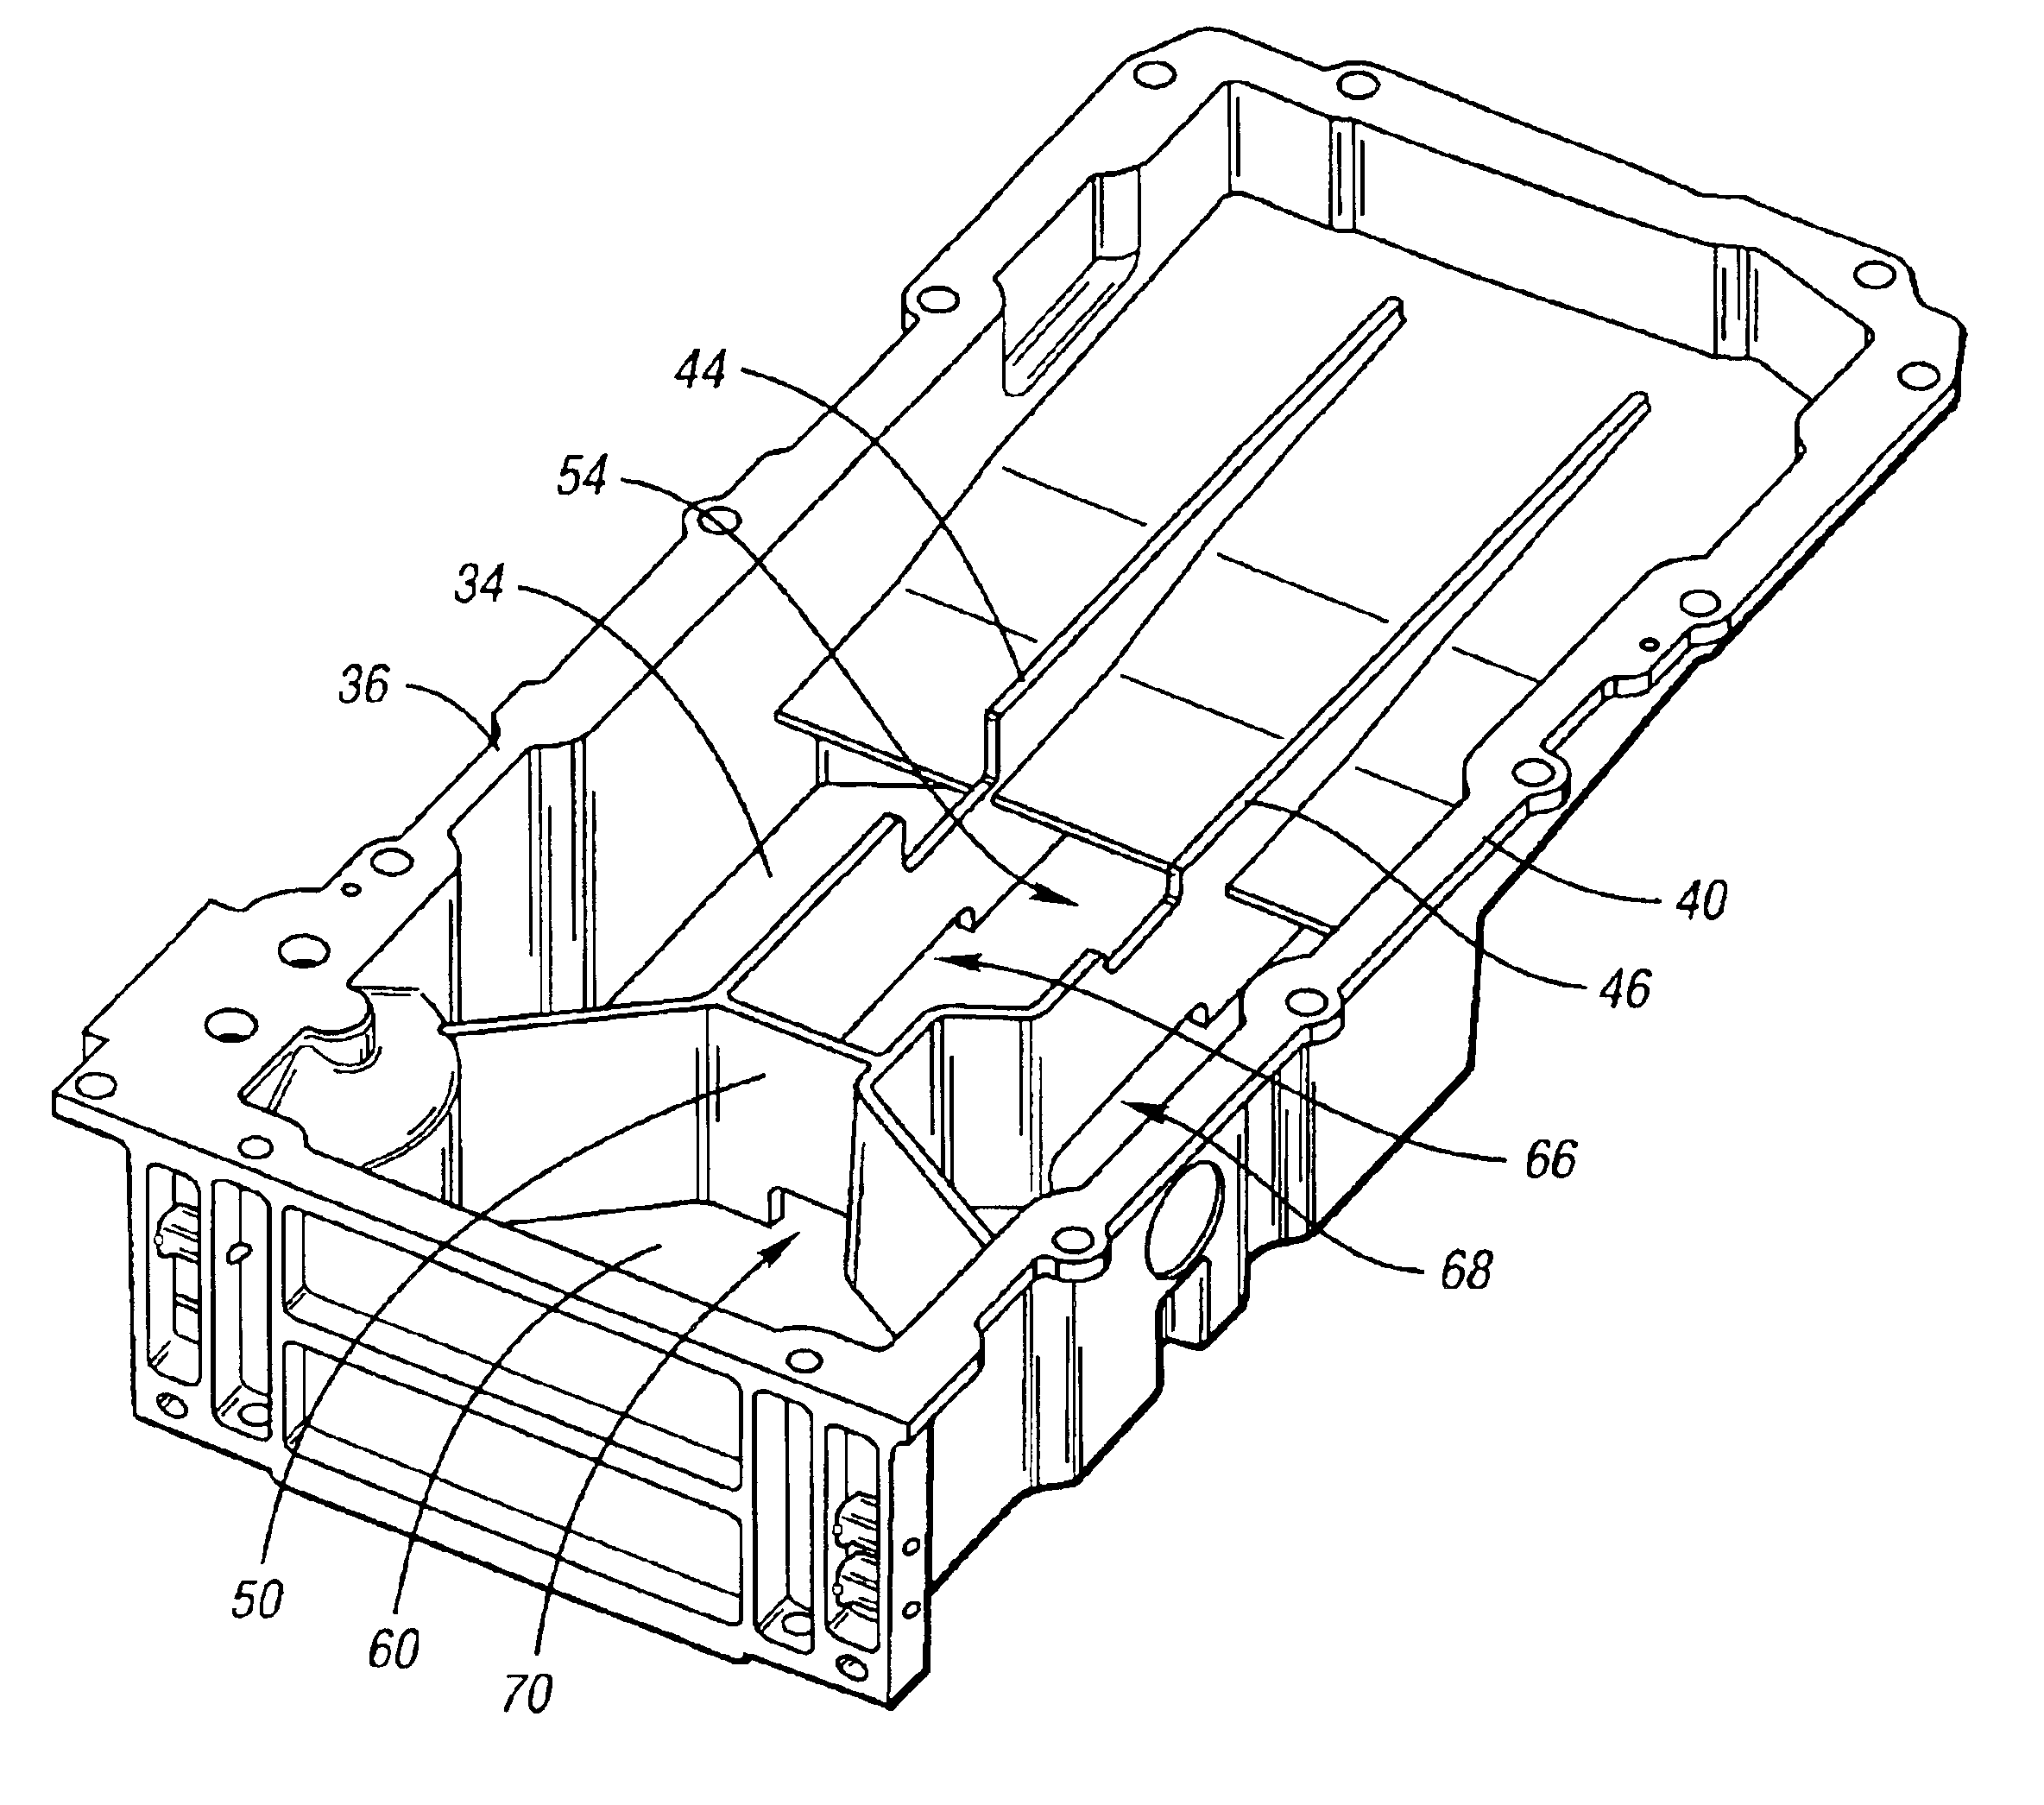 Oil pan with vertical baffles for oil flow control